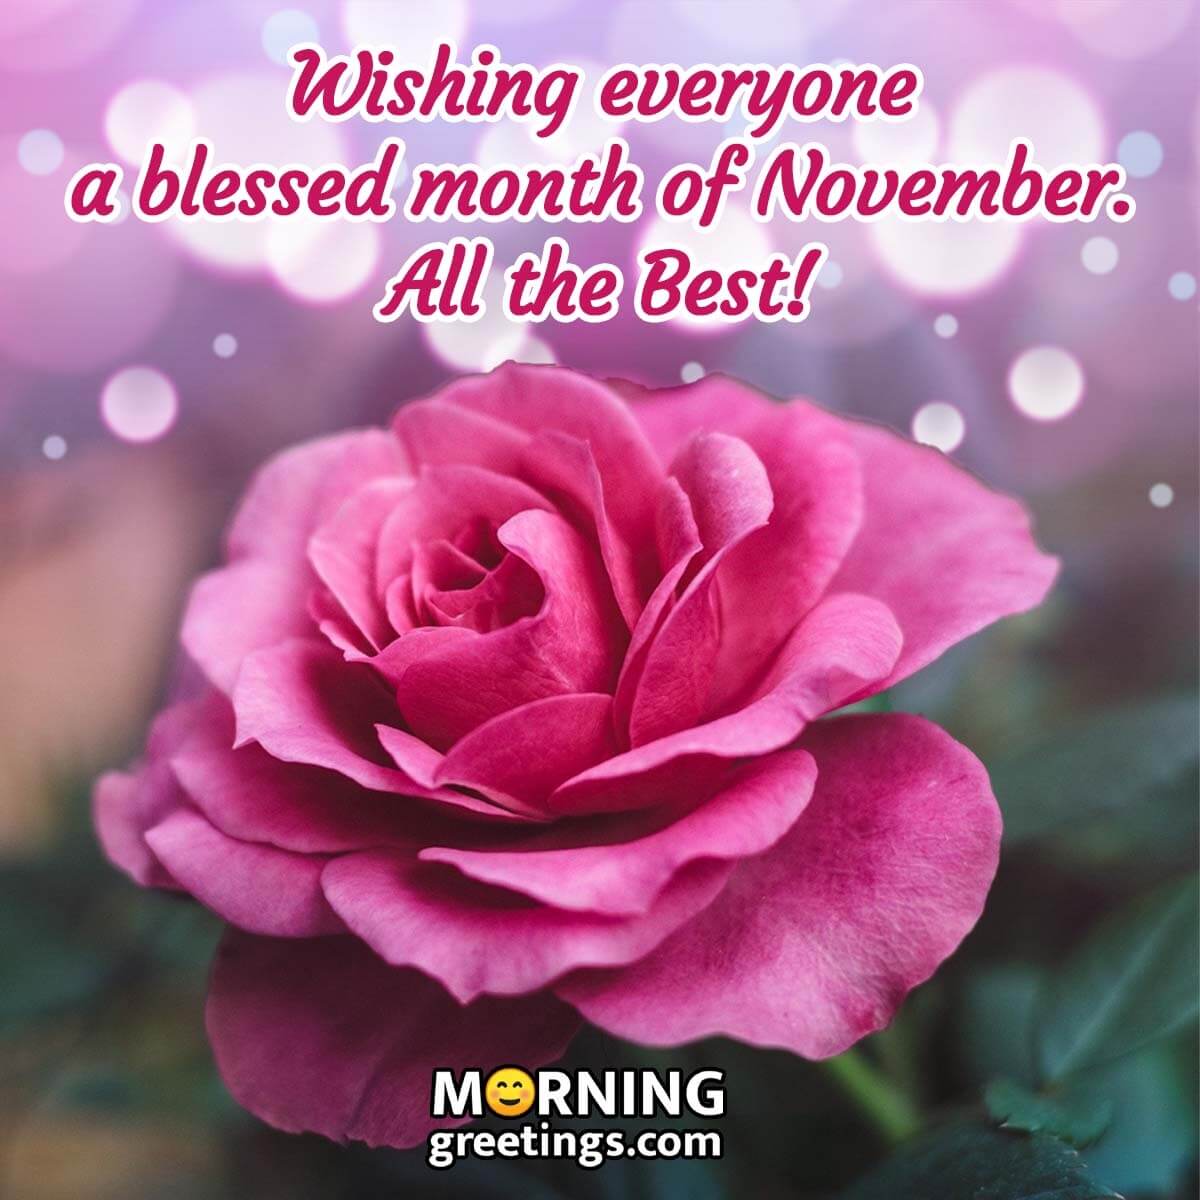 Wishing A Blessed Month Of November